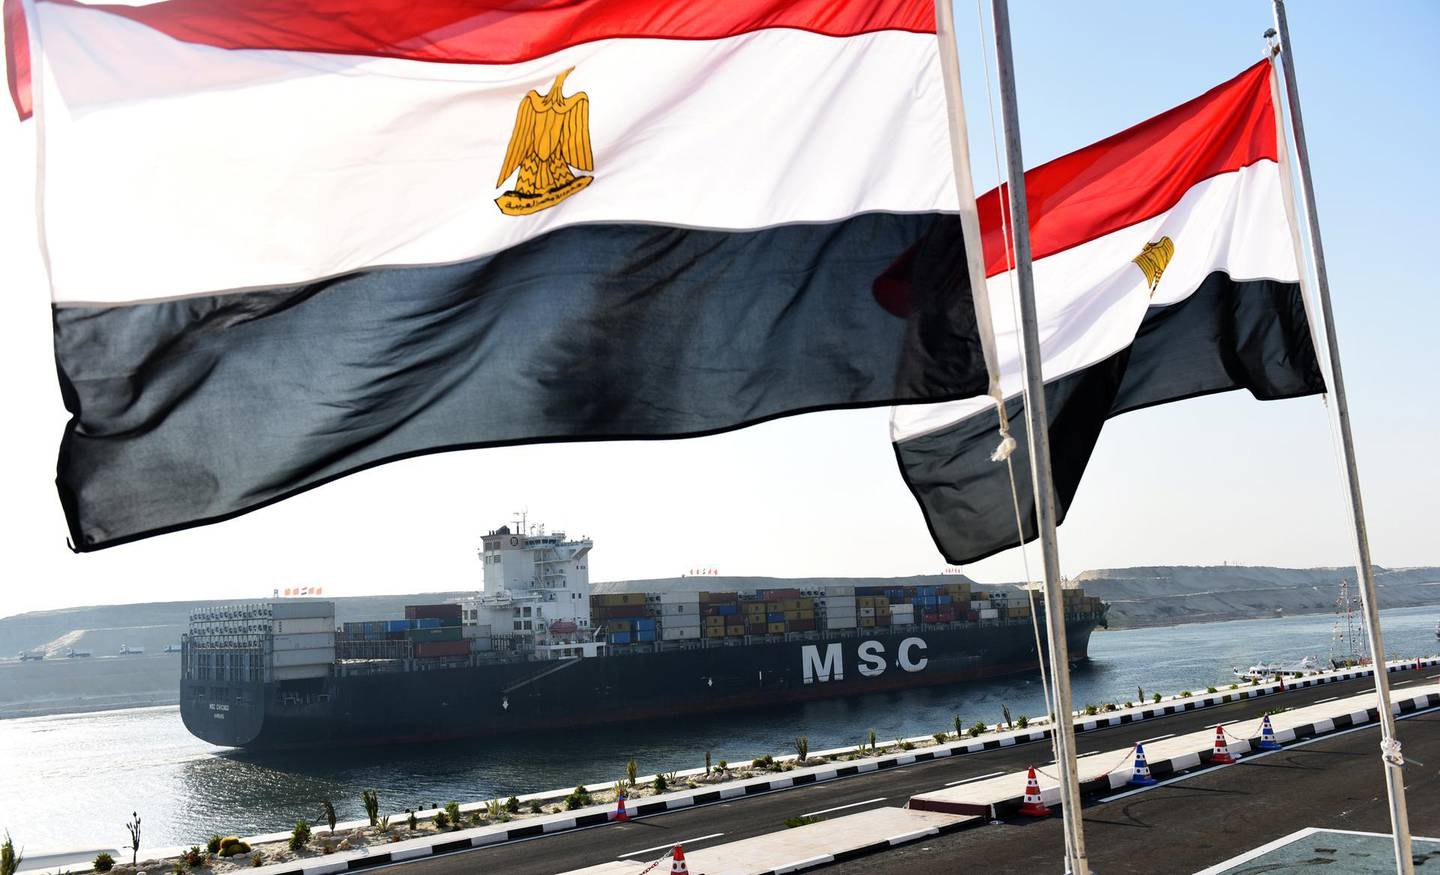 A cargo ship crosses a new waterway at the Suez Canal during its opening ceremony on August 6, 2015, in the port city of Ismailiya. Egyptian President Abdel Fattah al-Sisi staged a lavish ceremony to unveil a "new" Suez Canal, seeking to boost the country's economy and international standing by expanding the vital waterway.  AFP PHOTO / MOHAMED EL-SHAHED (Photo by MOHAMED EL-SHAHED / AFP)